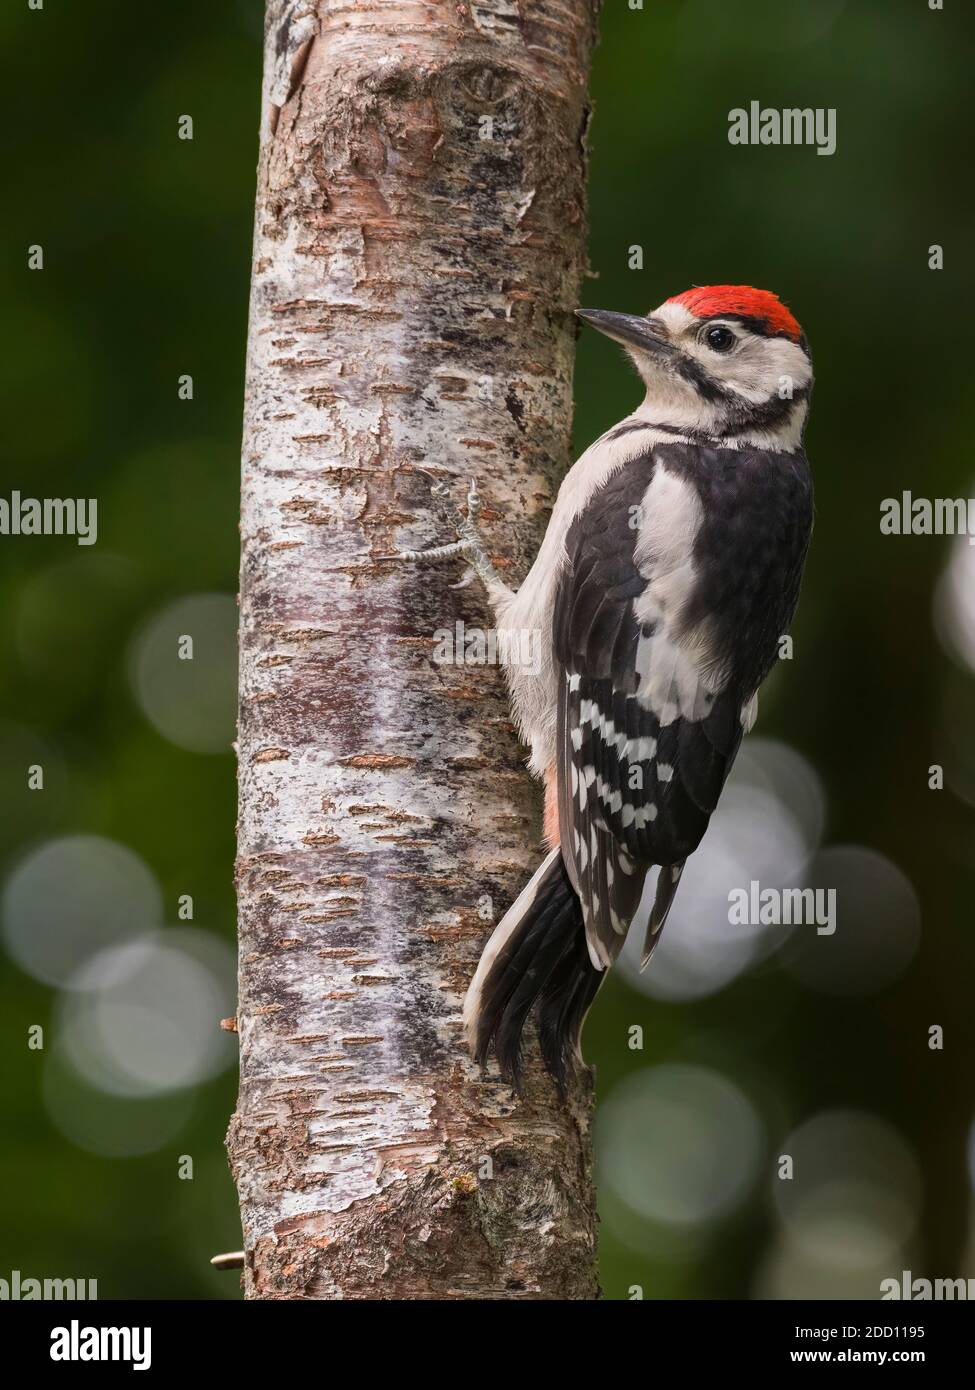 Juvenile Great Spotted Woodpecker, Dendrocopos major, on a birch tree, Dumfries & Galloway, Scotland Stock Photo